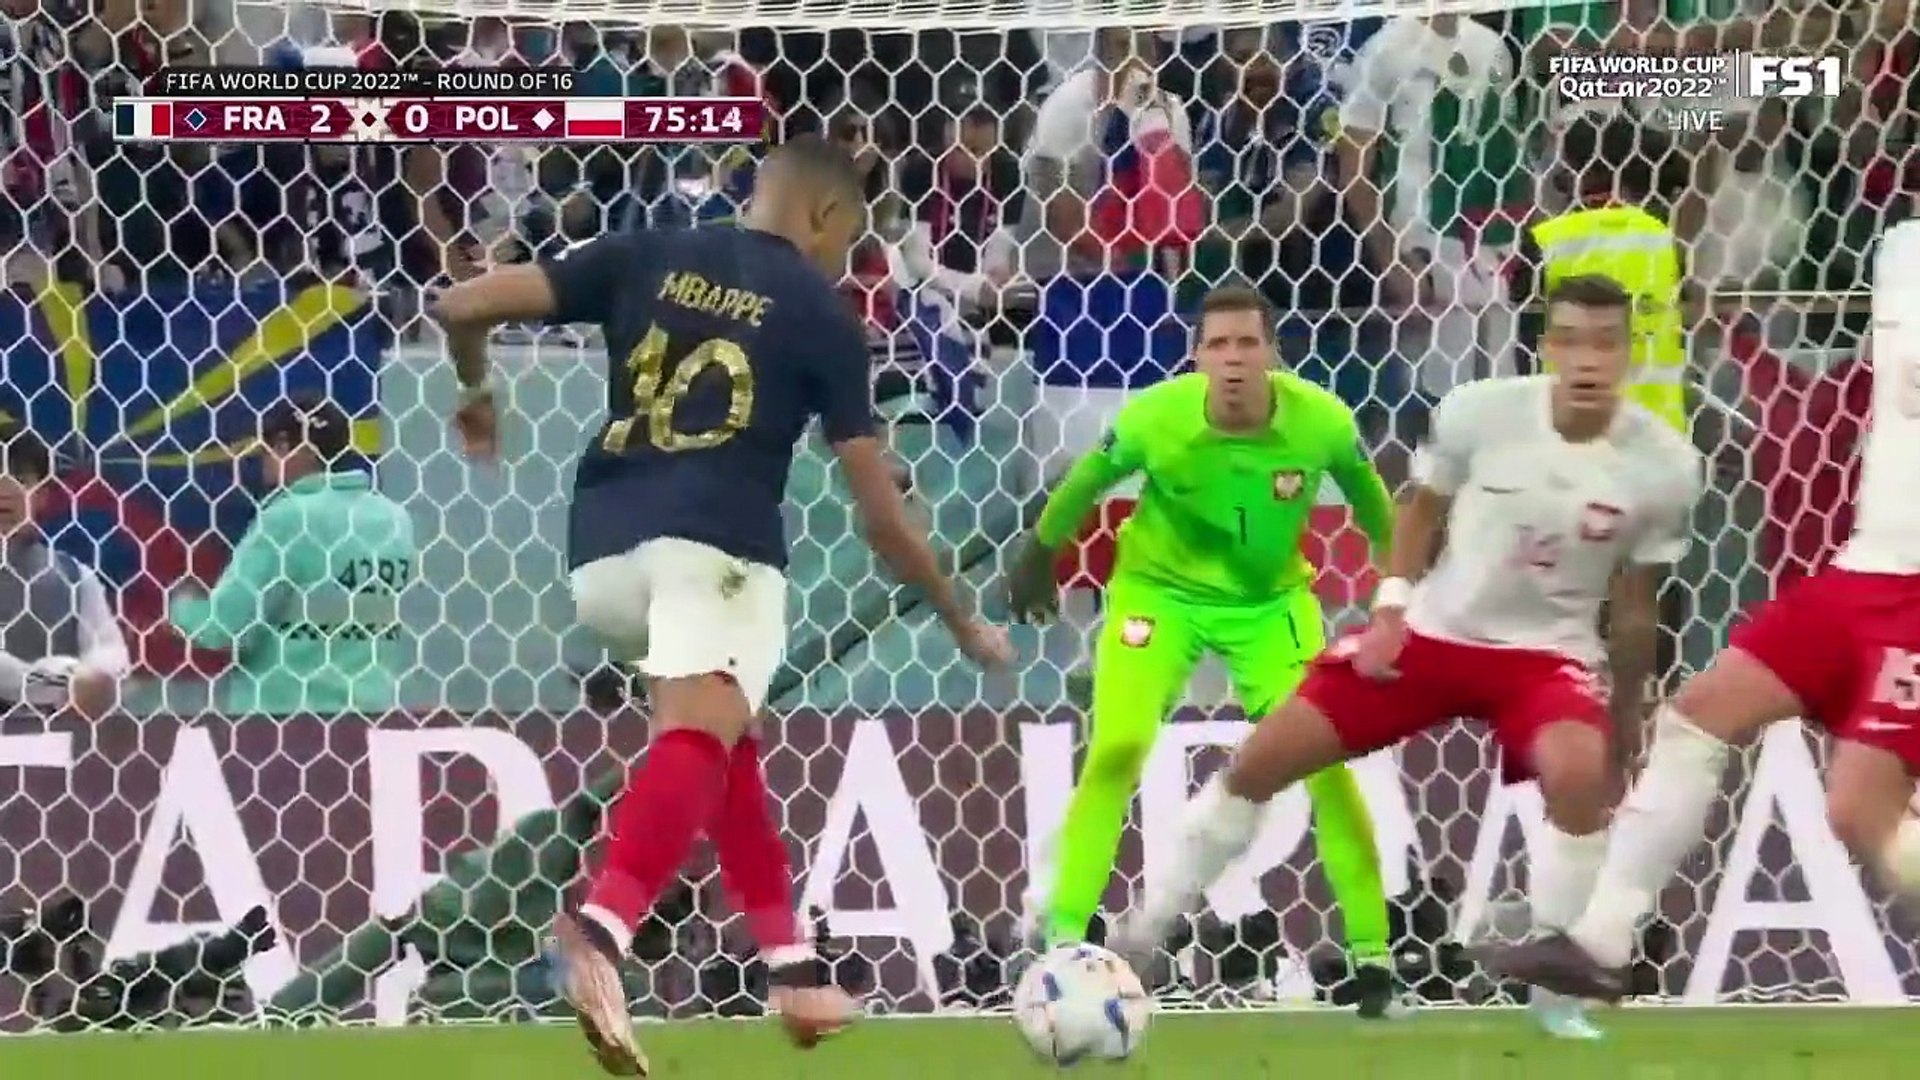 2022 FIFA World Cup- Every goal from the Round of 16 - FOX Soccer